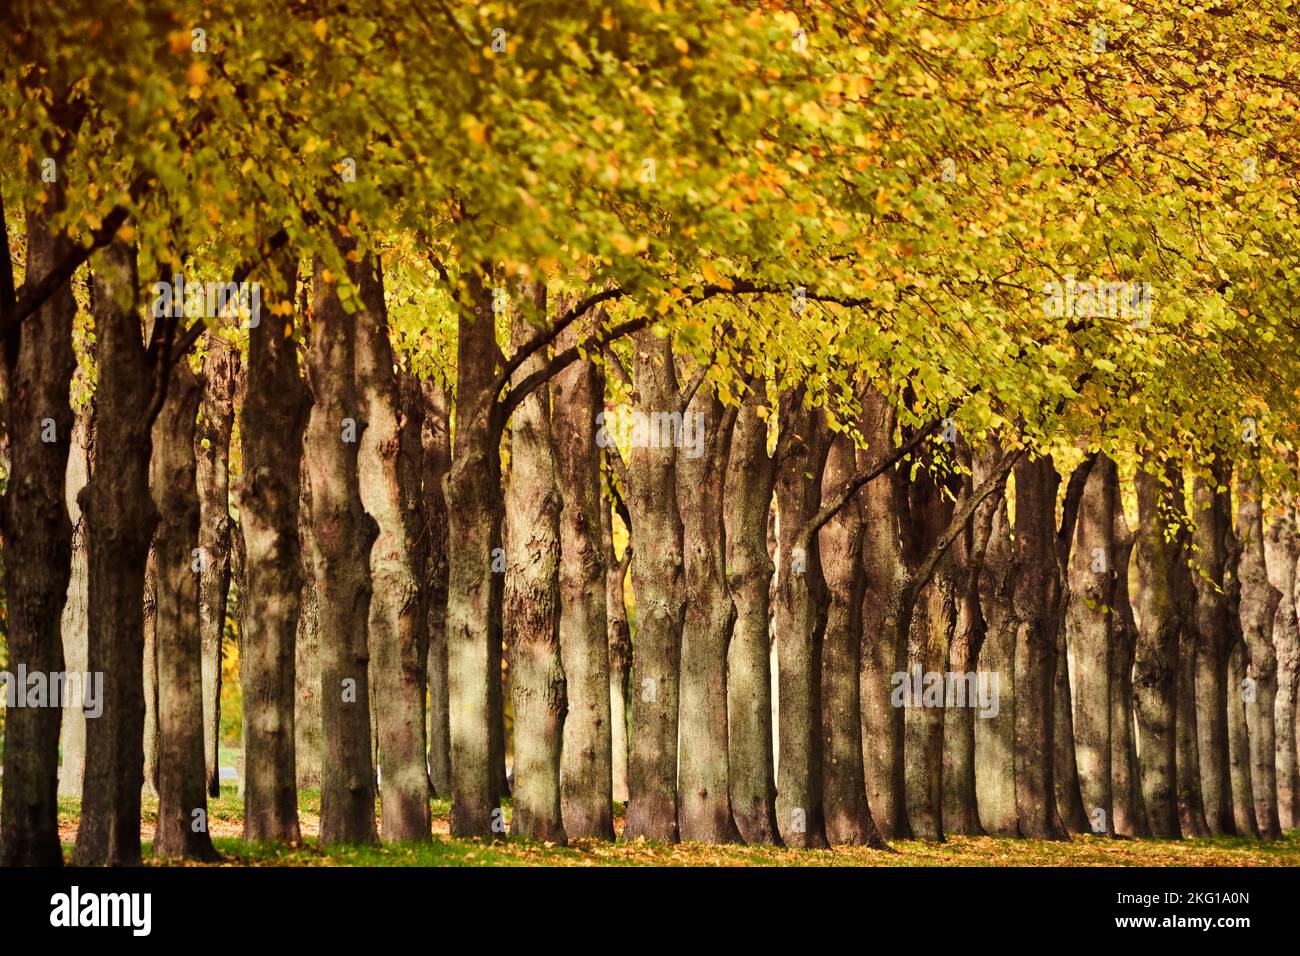 Side view of an avenue of linden trees with trunks close together and a brightly shining canopy of leaves Stock Photo